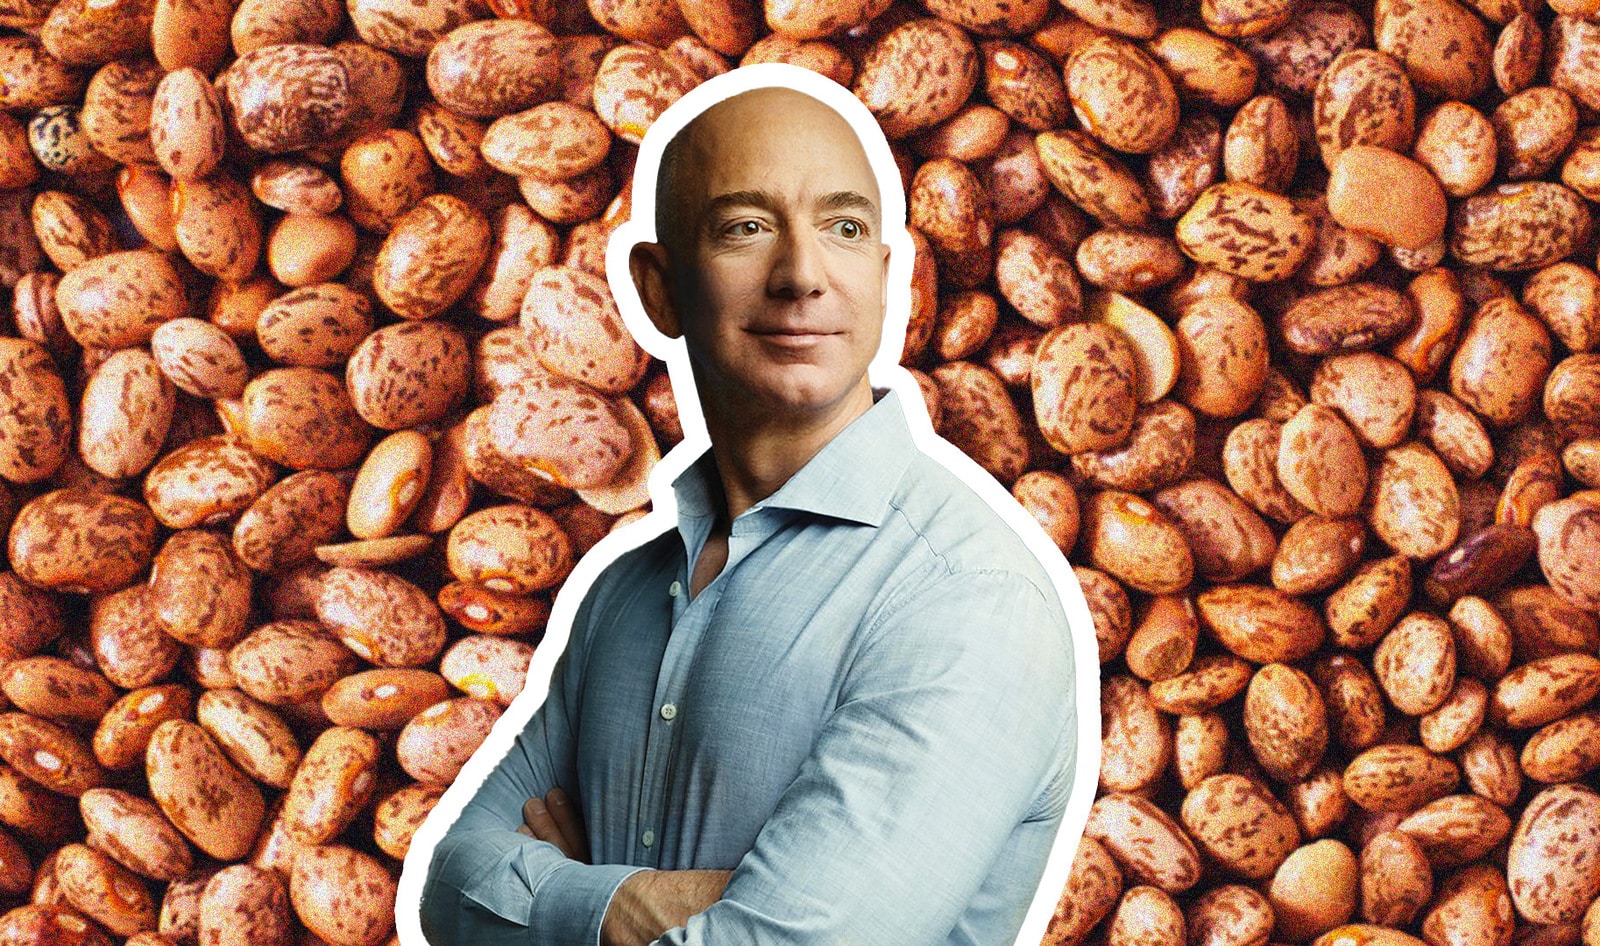 Google and Jeff Bezos Want You to Eat More Beans | VegNews